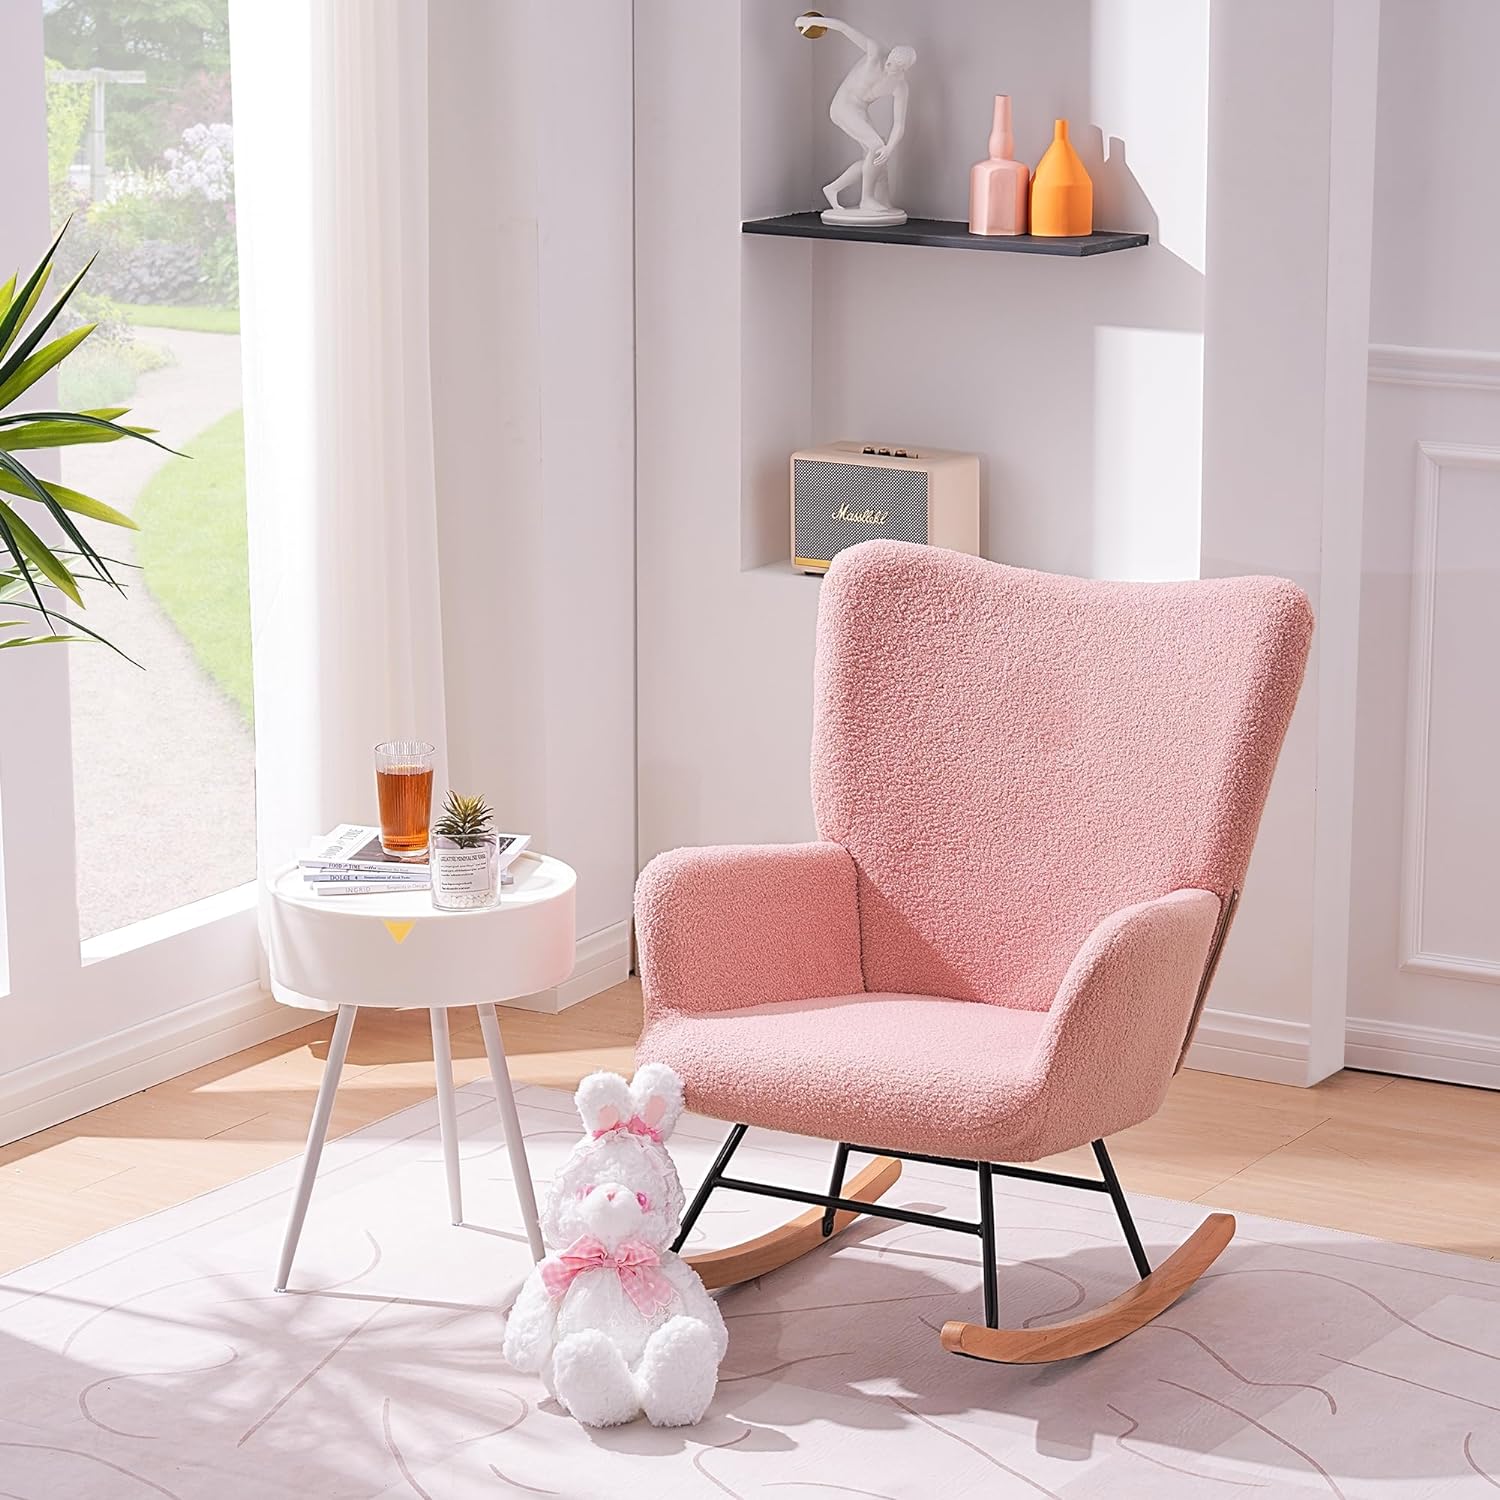 VECELO Rocking Chair, Modern Upholstered Teddy Fabric Nursery Glider with Padded Seat